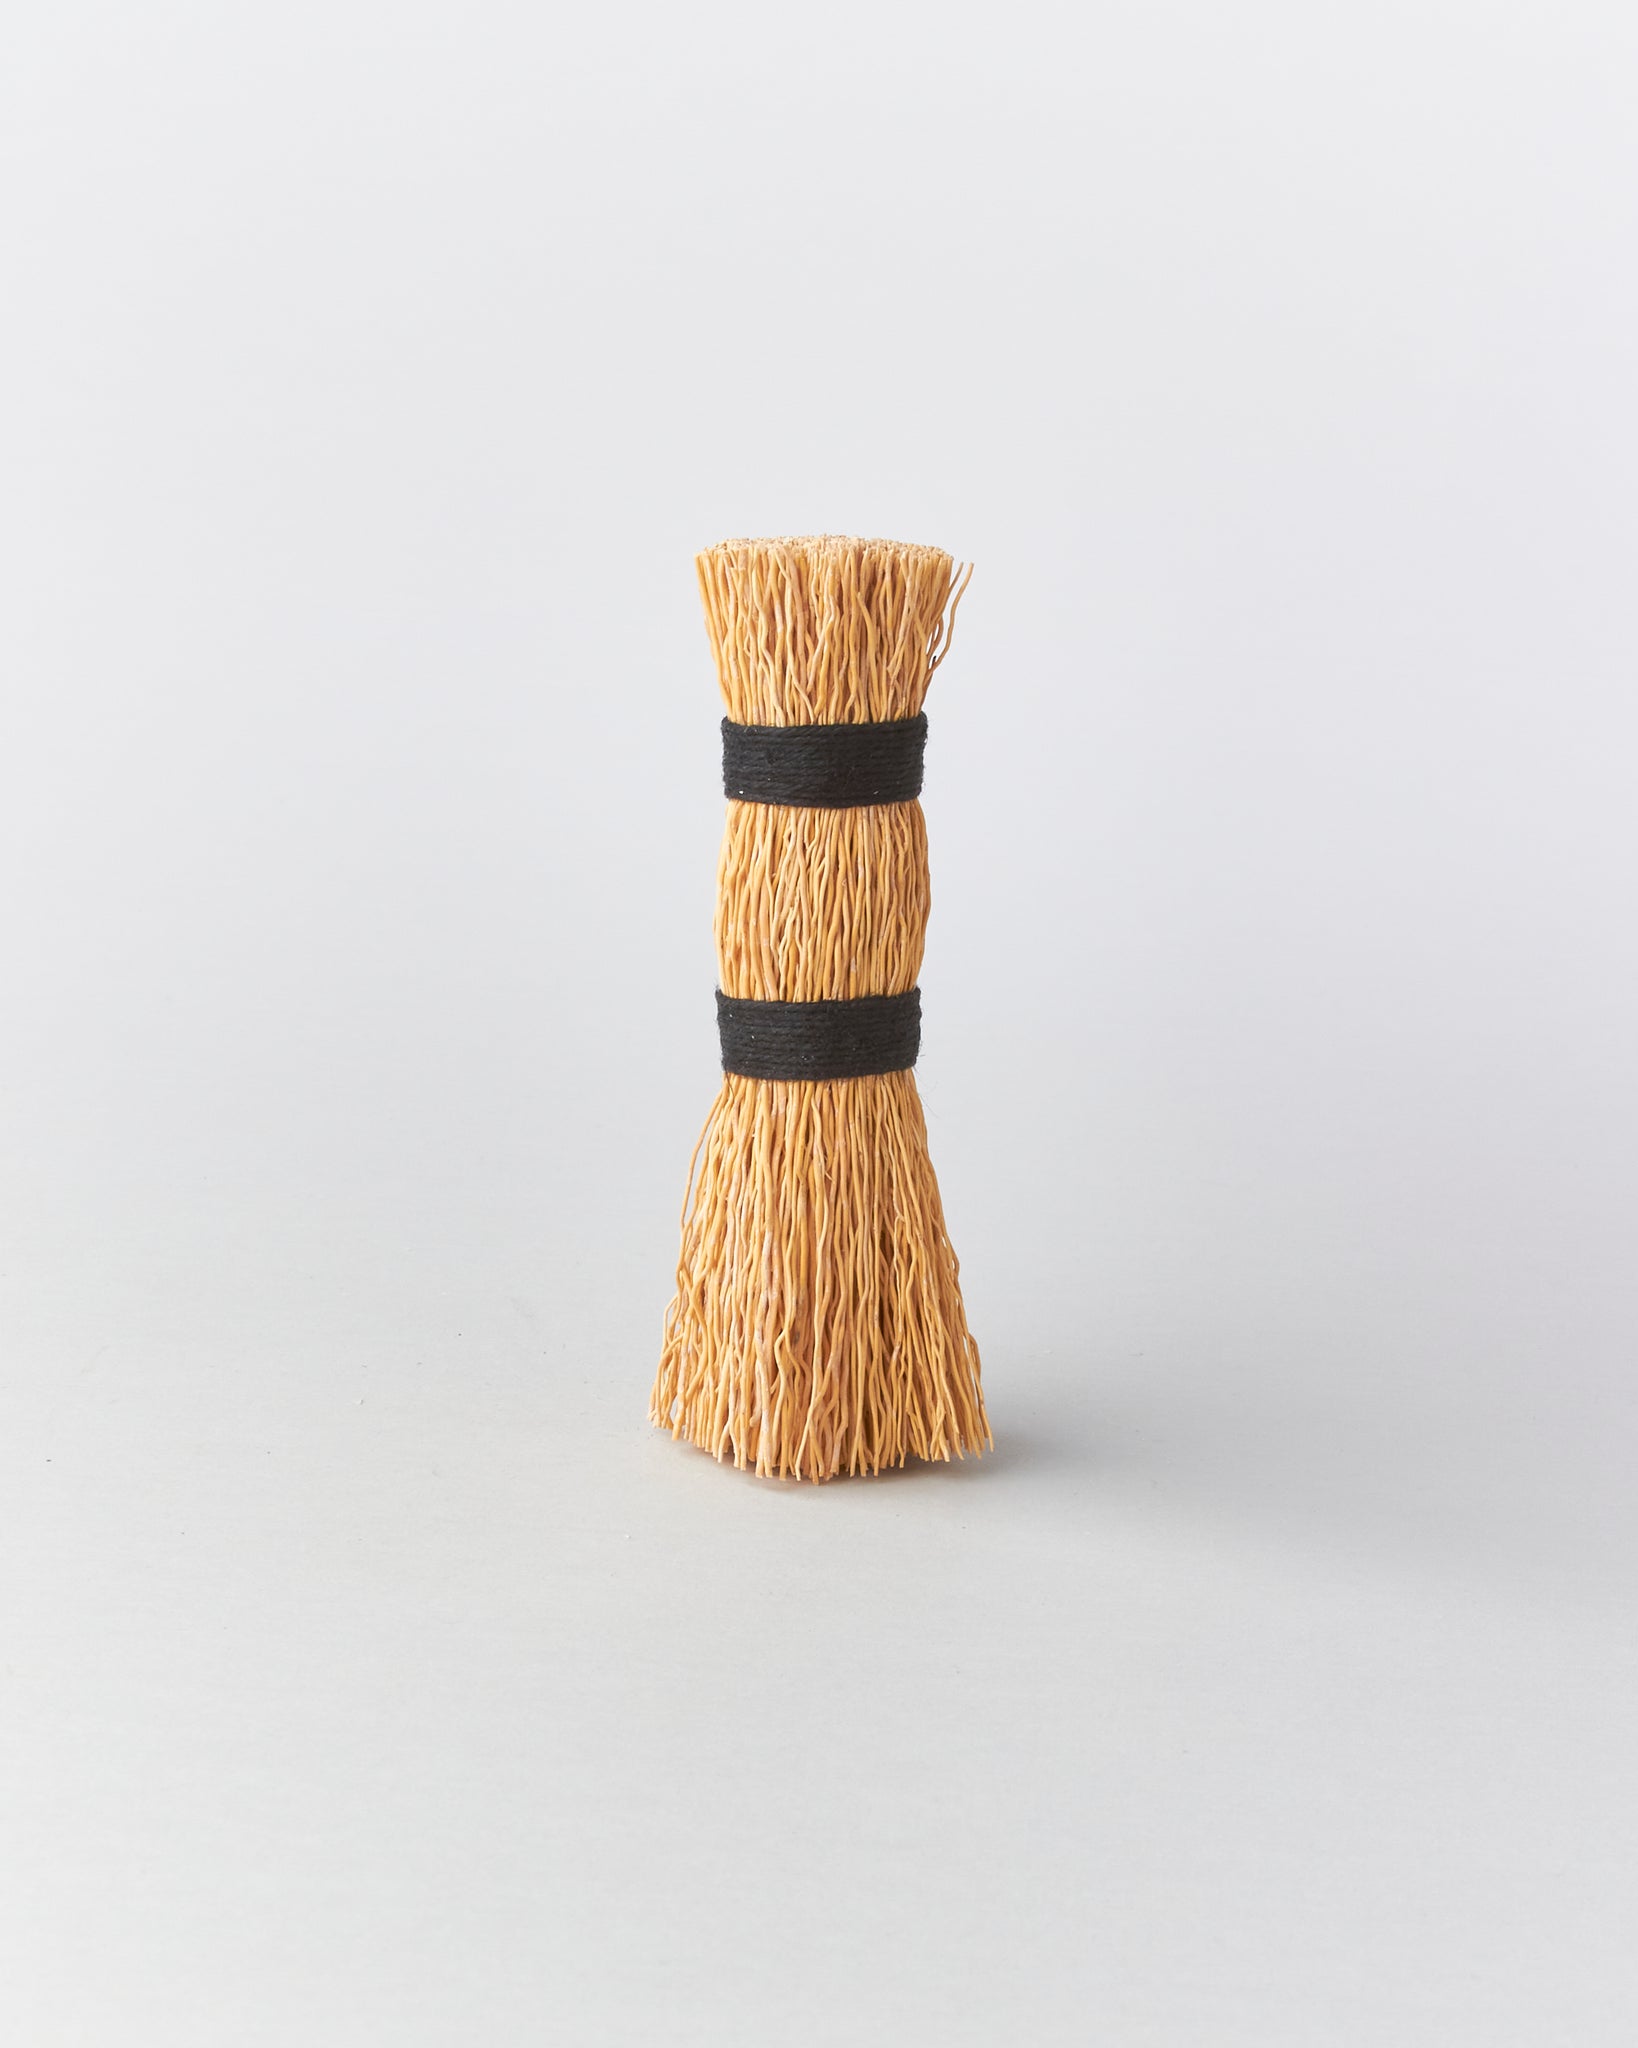 Cereal Root Whisk Brush